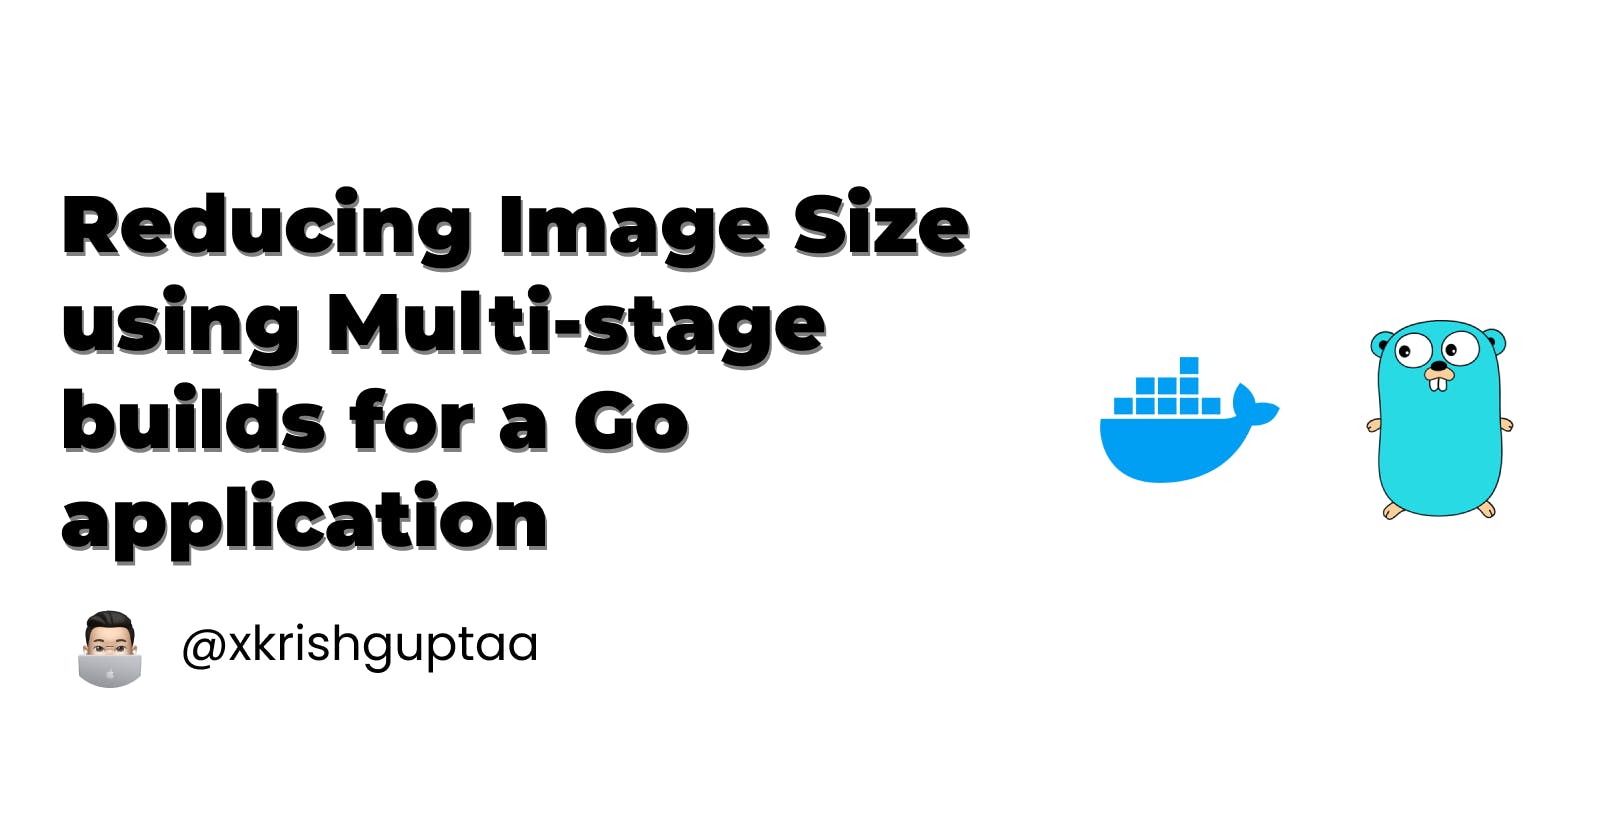 Reducing Image Size using Multi-stage builds for a Go application